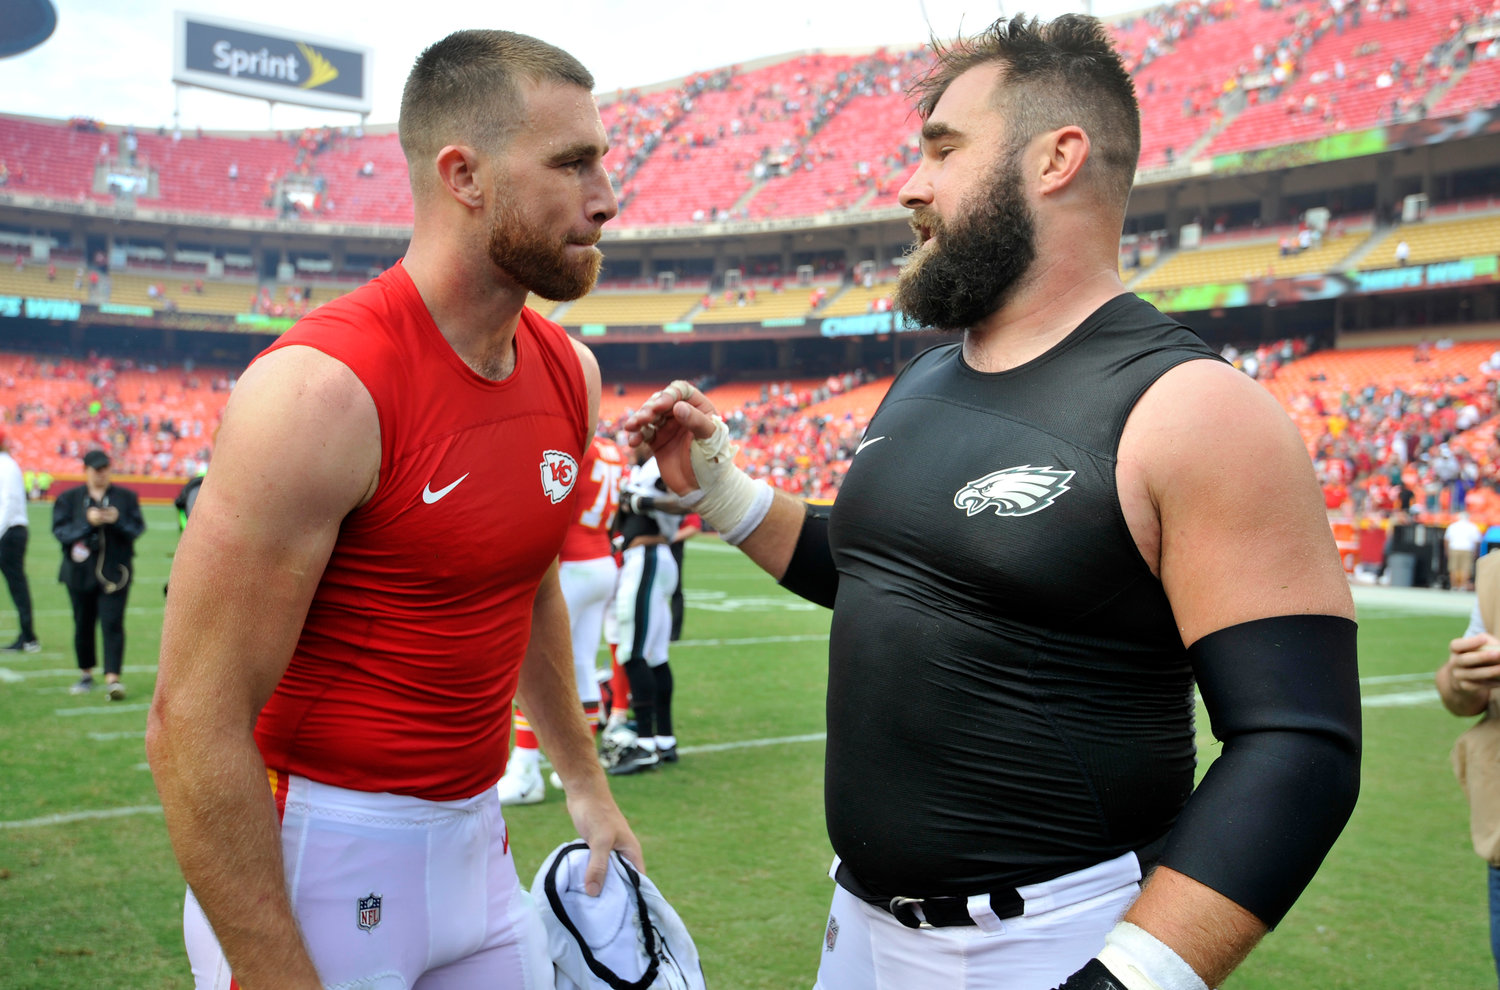 Kansas City Chiefs tight end Travis Kelce, left, talks to his brother, Philadelphia Eagles center Jason Kelce, after they exchanged jerseys following an NFL football game in Kansas City, Mo., Sept. 17, 2017. For the first time in Super Bowl history, a pair of siblings will play each other on the NFL's grandest stage. Travis helped the Chiefs return to their third championship game in four seasons on Sunday night when they beat the Bengals for the AFC title, while Jason has the Eagles back for the second time in six years after their NFC title win over the 49ers.